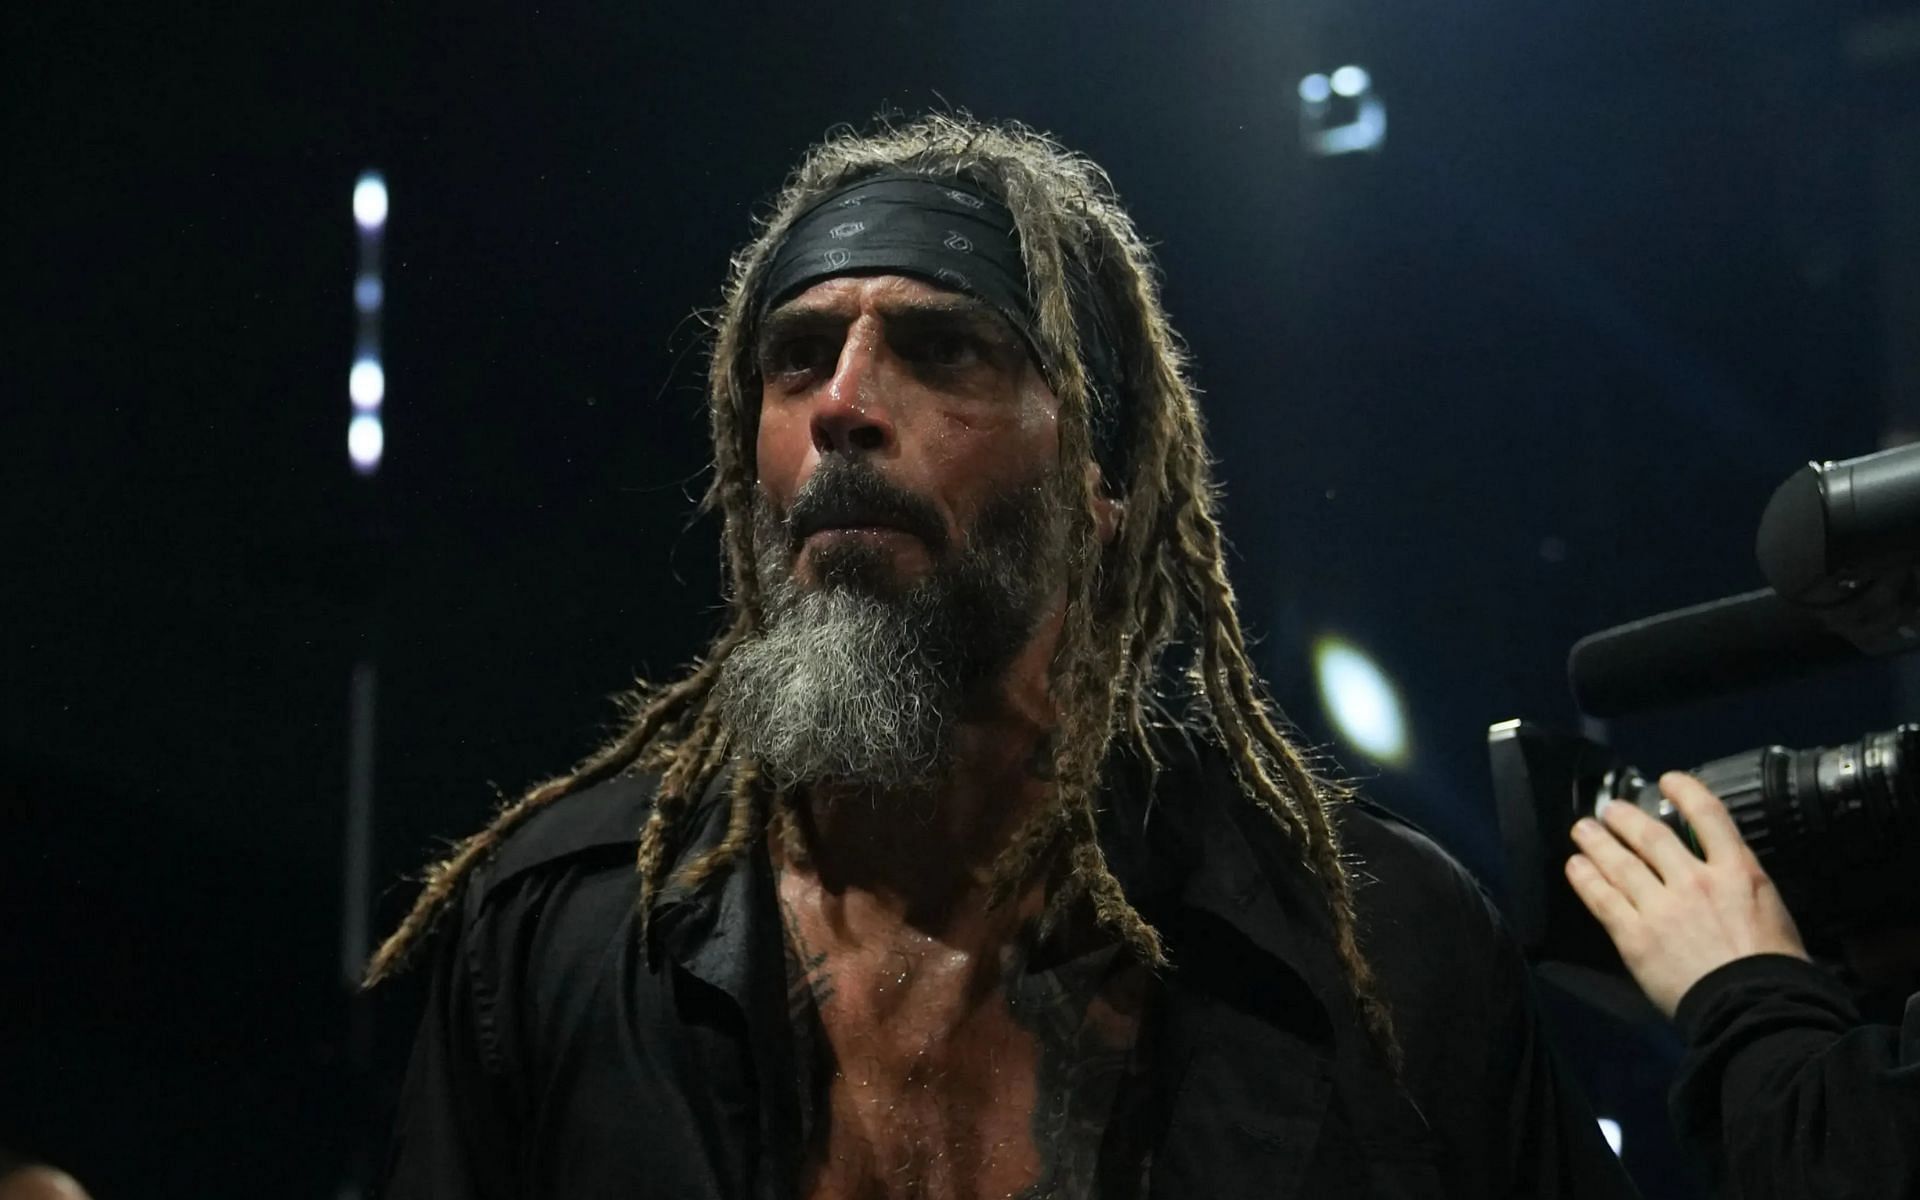 Jay Briscoe majorly contributed to ROH for nearly two-decades